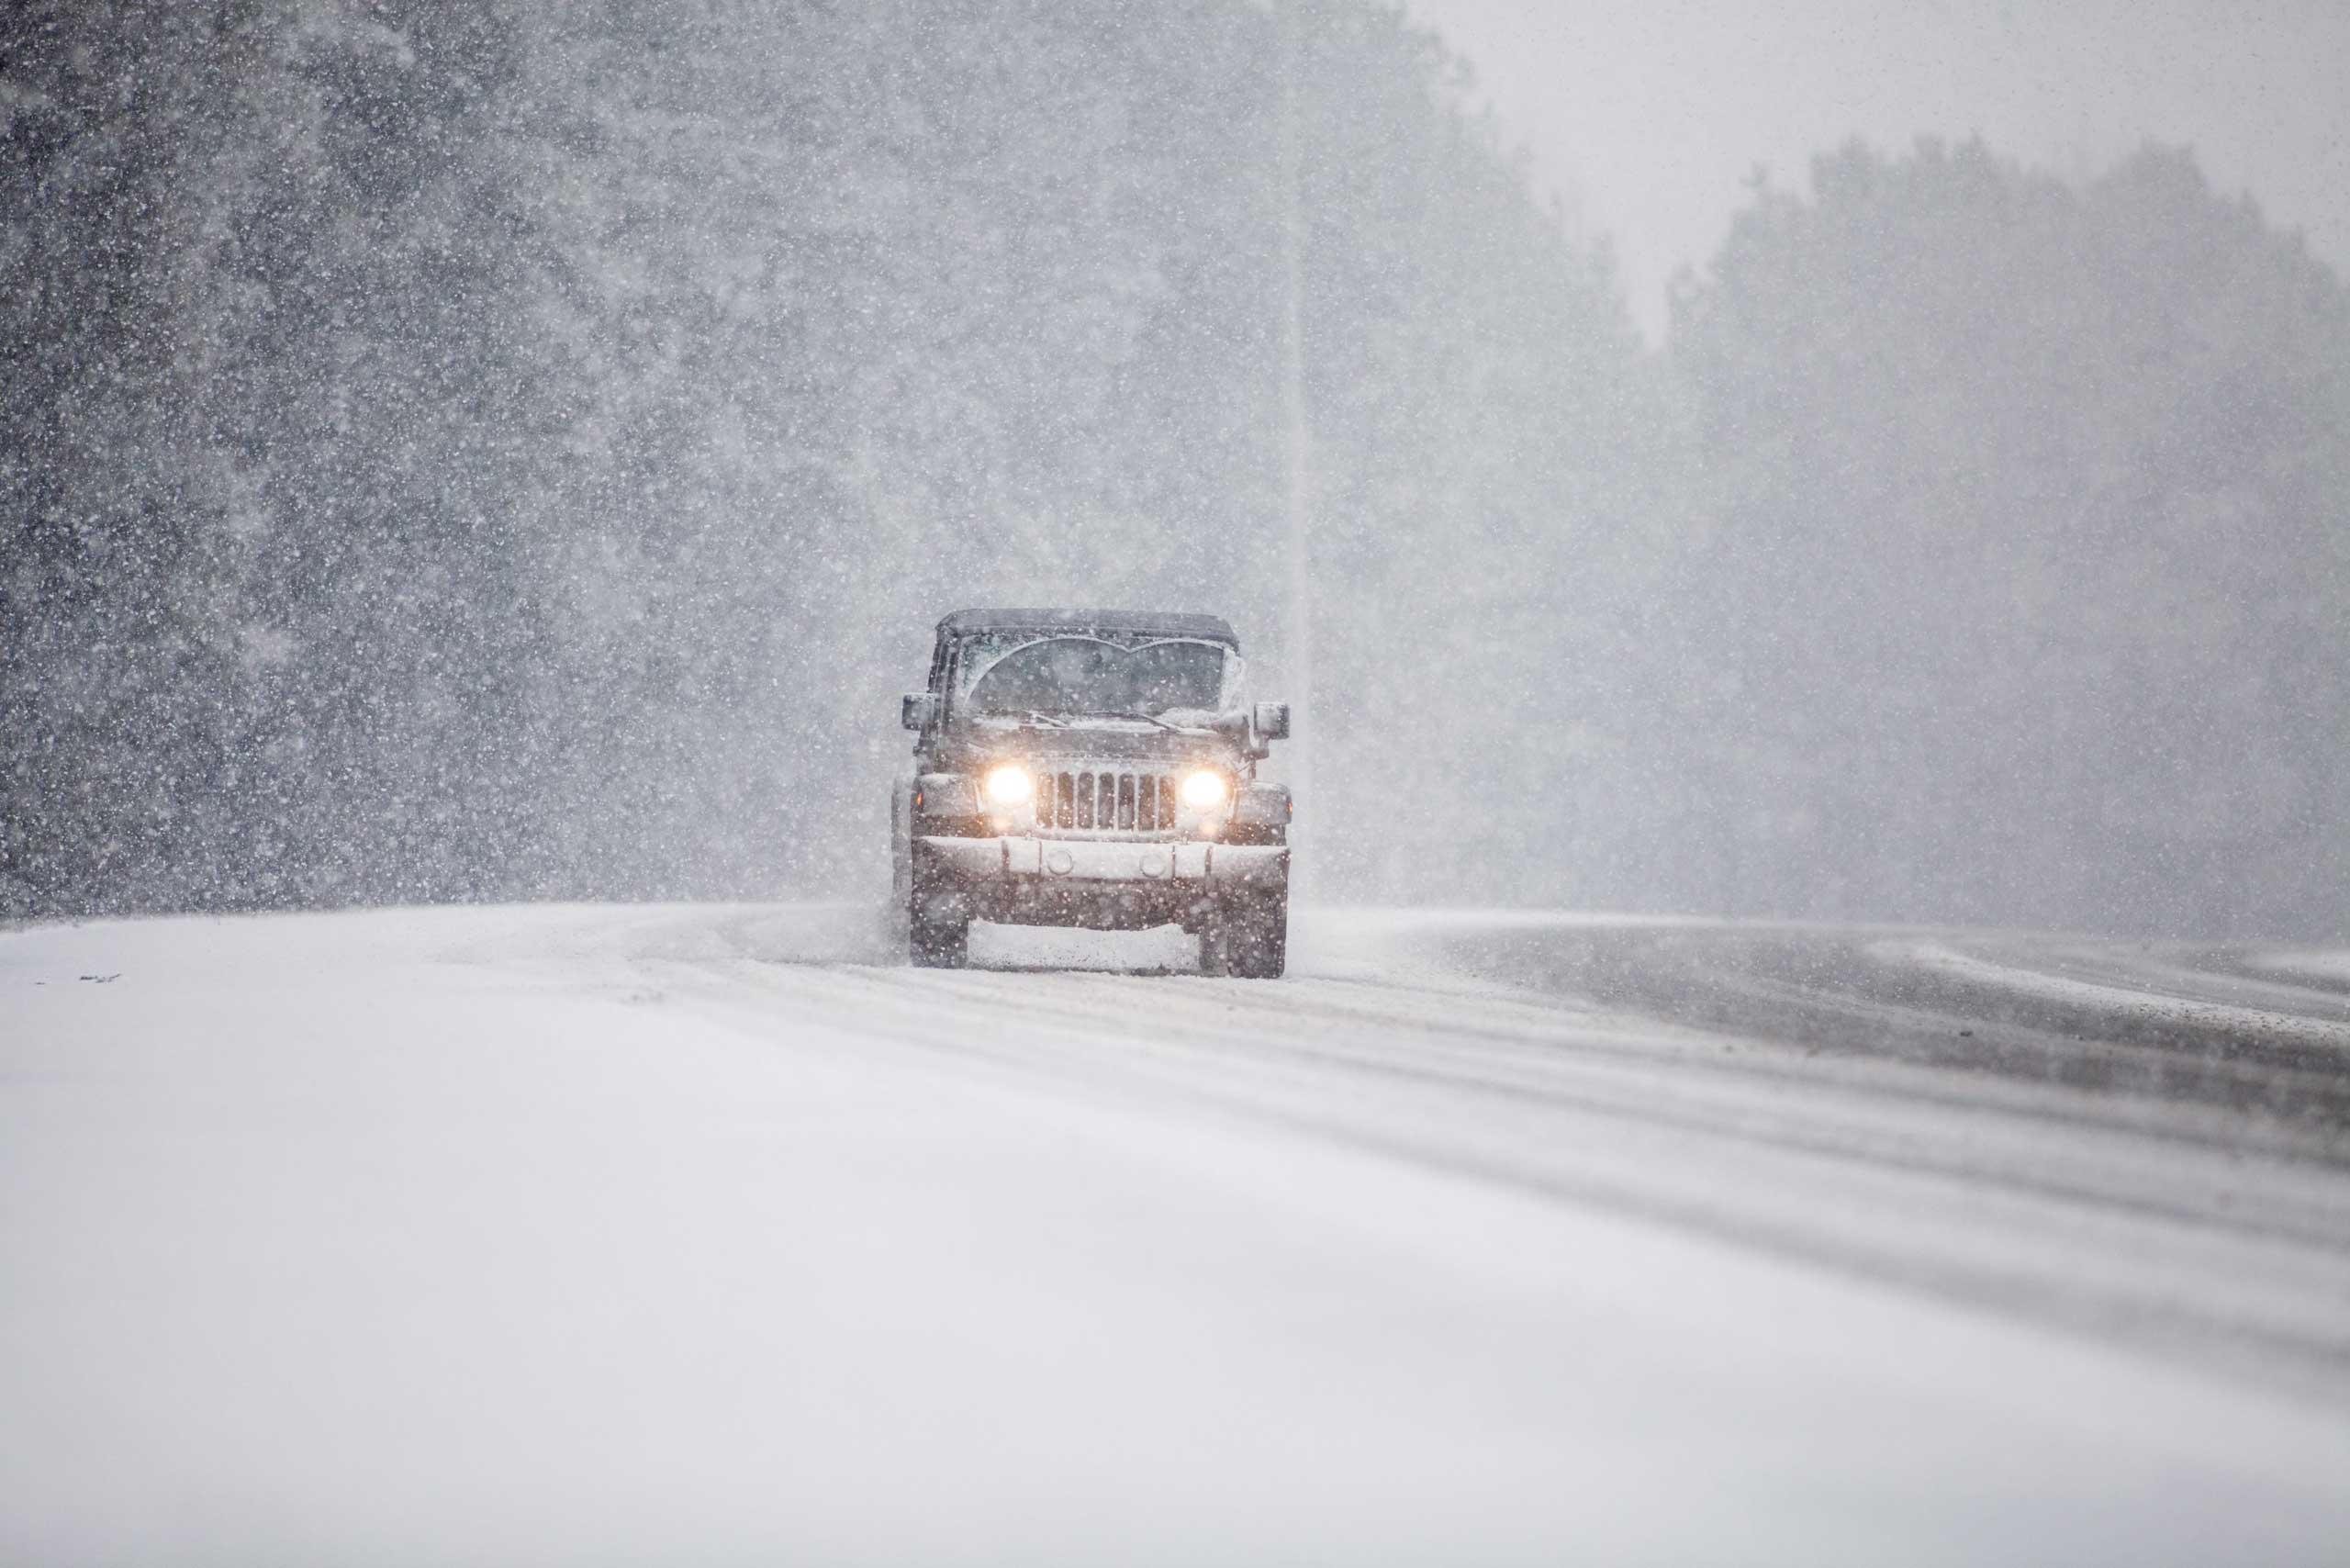 A vehicle drives in the snow on Interstate 575 in Acworth, Ga. on Feb. 25, 2015. (Branden Camp—EPA)